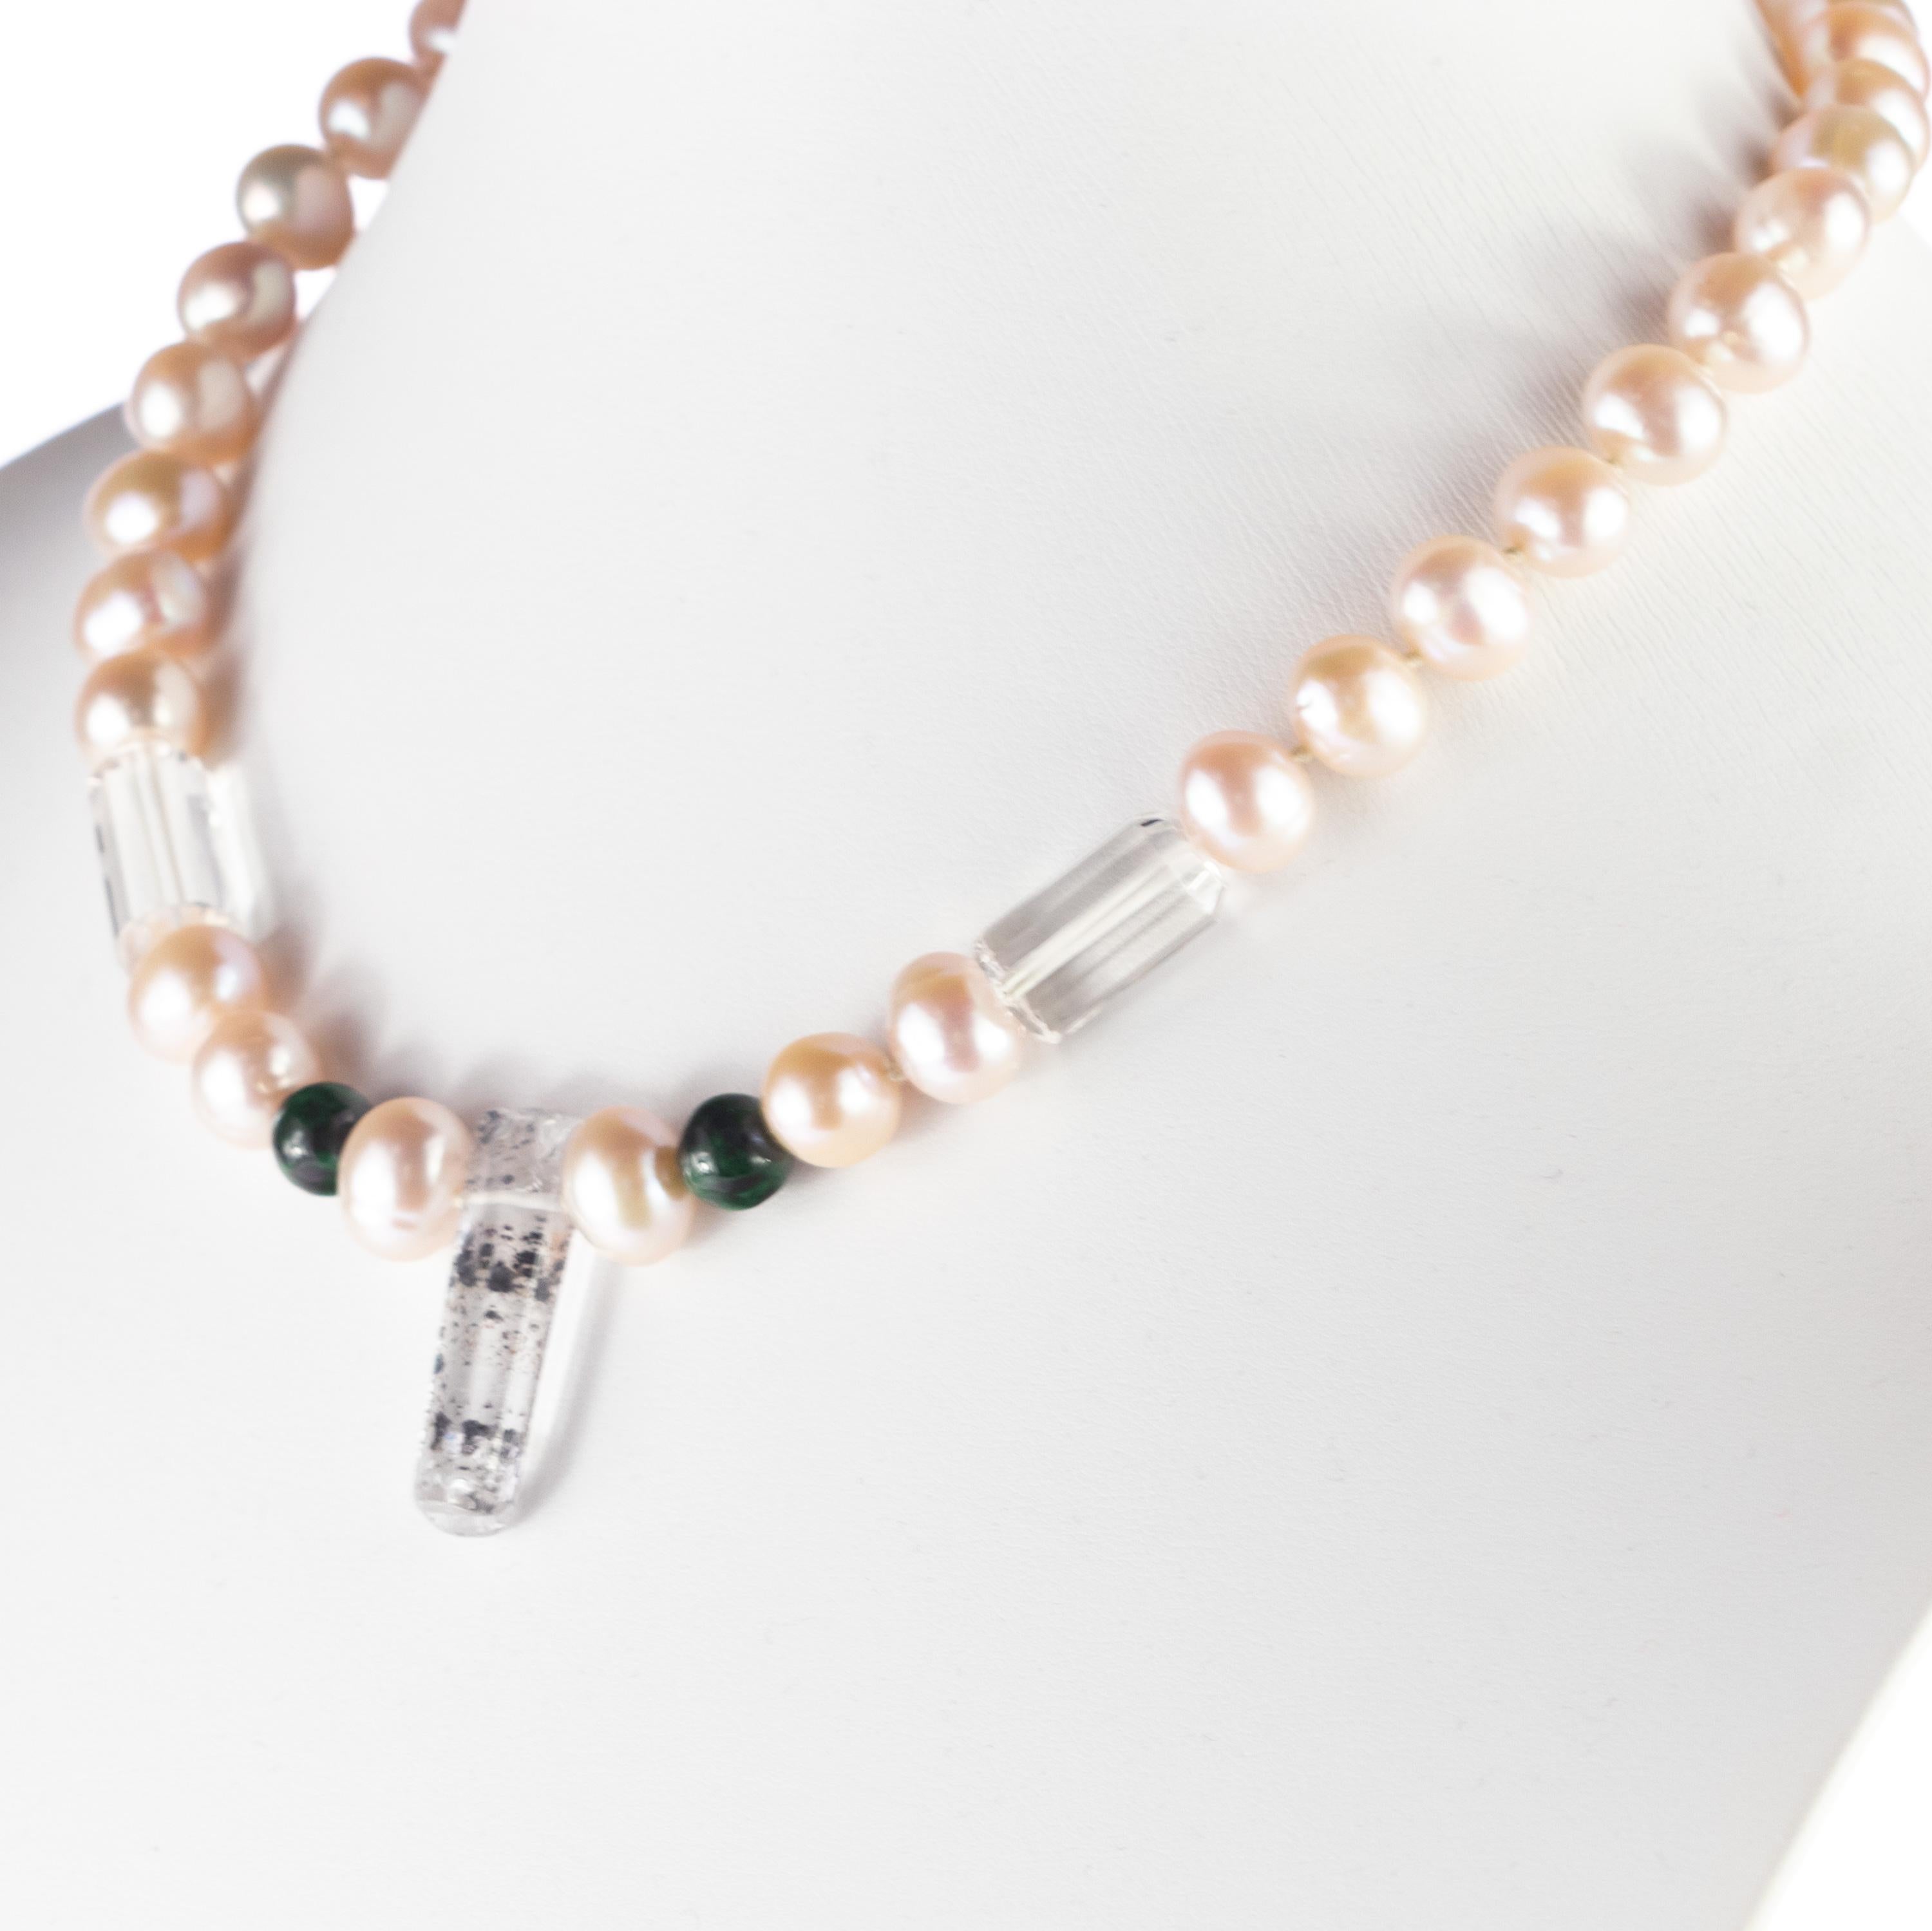 First class natural freshwater natural pearls with an elegant closure in 18k white gold. An iconic collier for an elegant outfit. A timeless design with rock crystal asymmetric pieces and jade spheres. Top quality materials for a Made in Italy